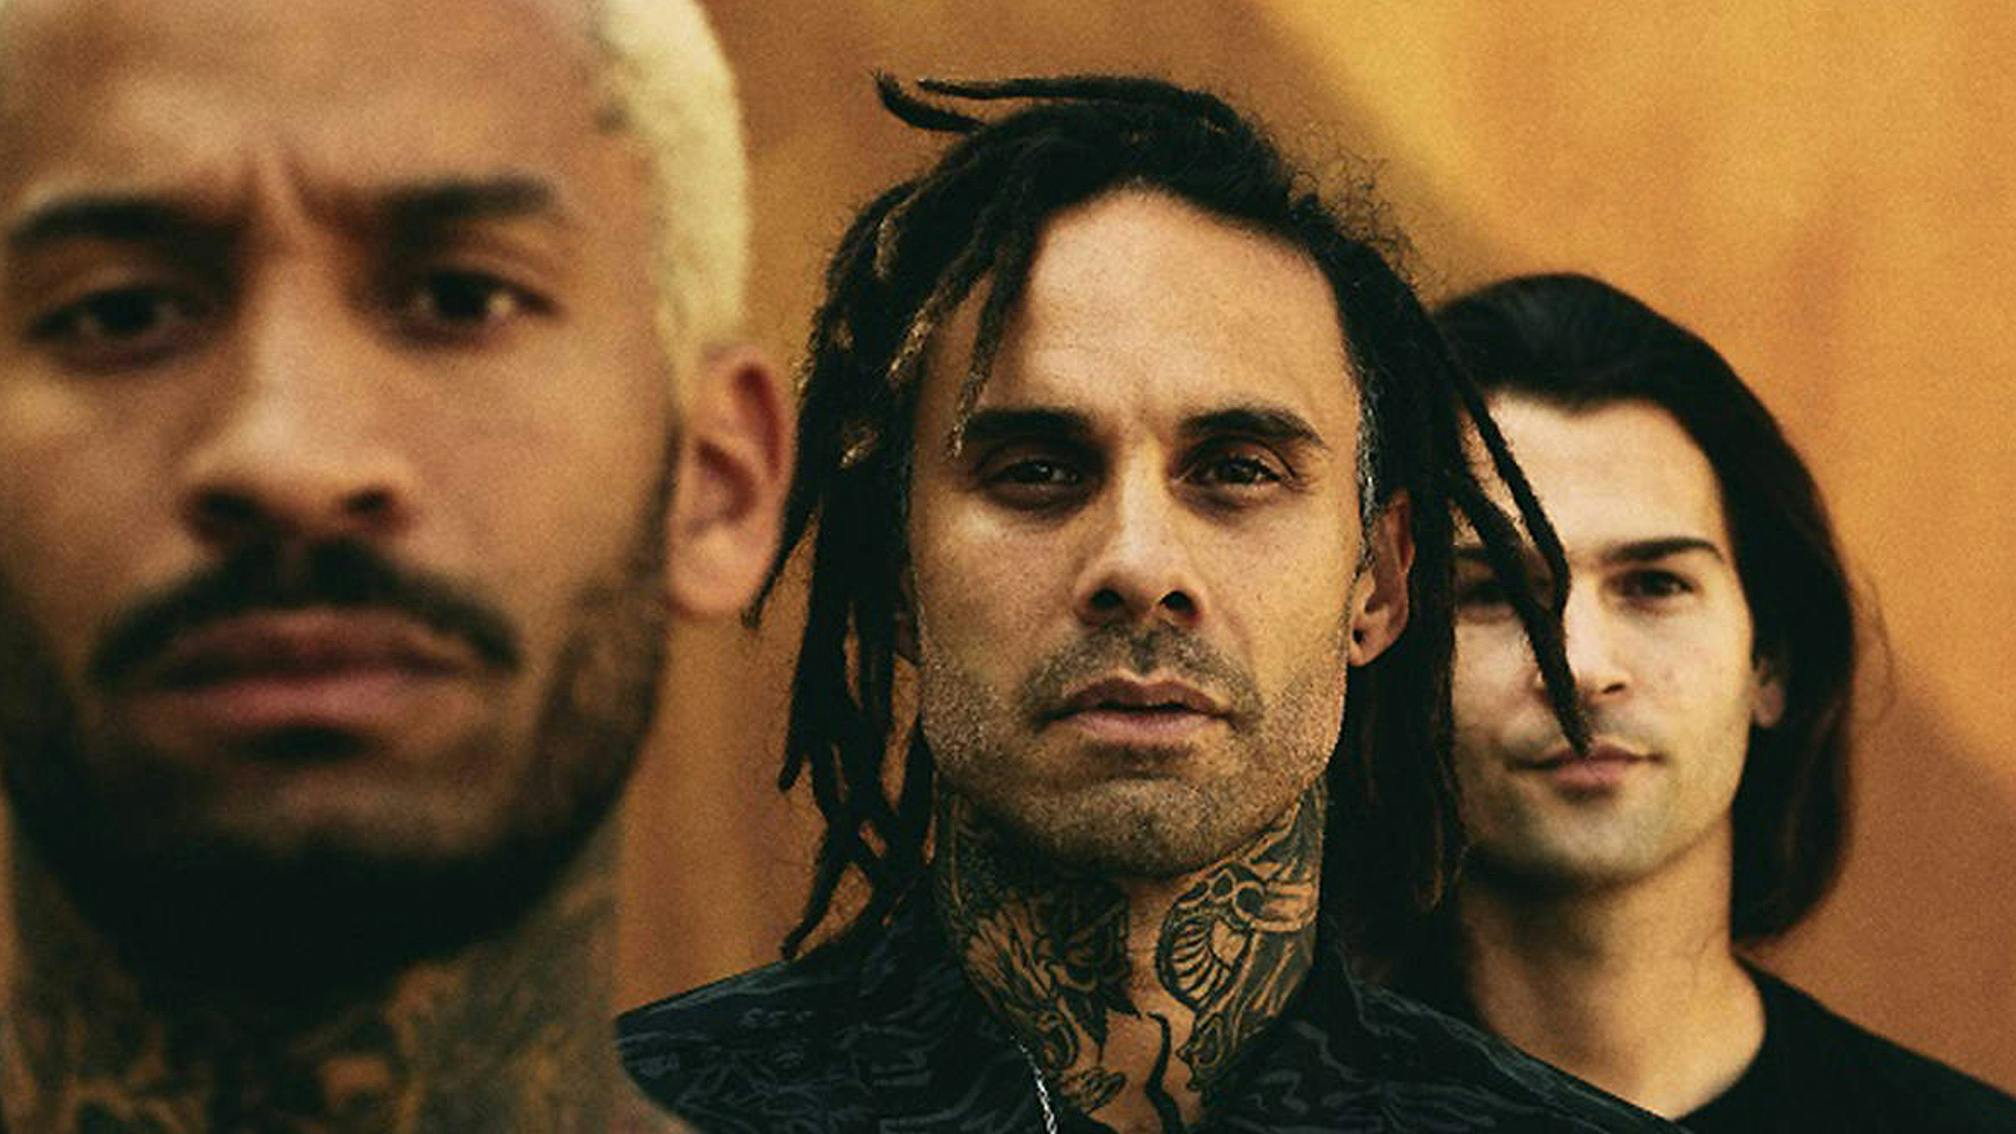 FEVER 333 Share New Song Written And Recorded In 24 Hours After U.S. Election Results